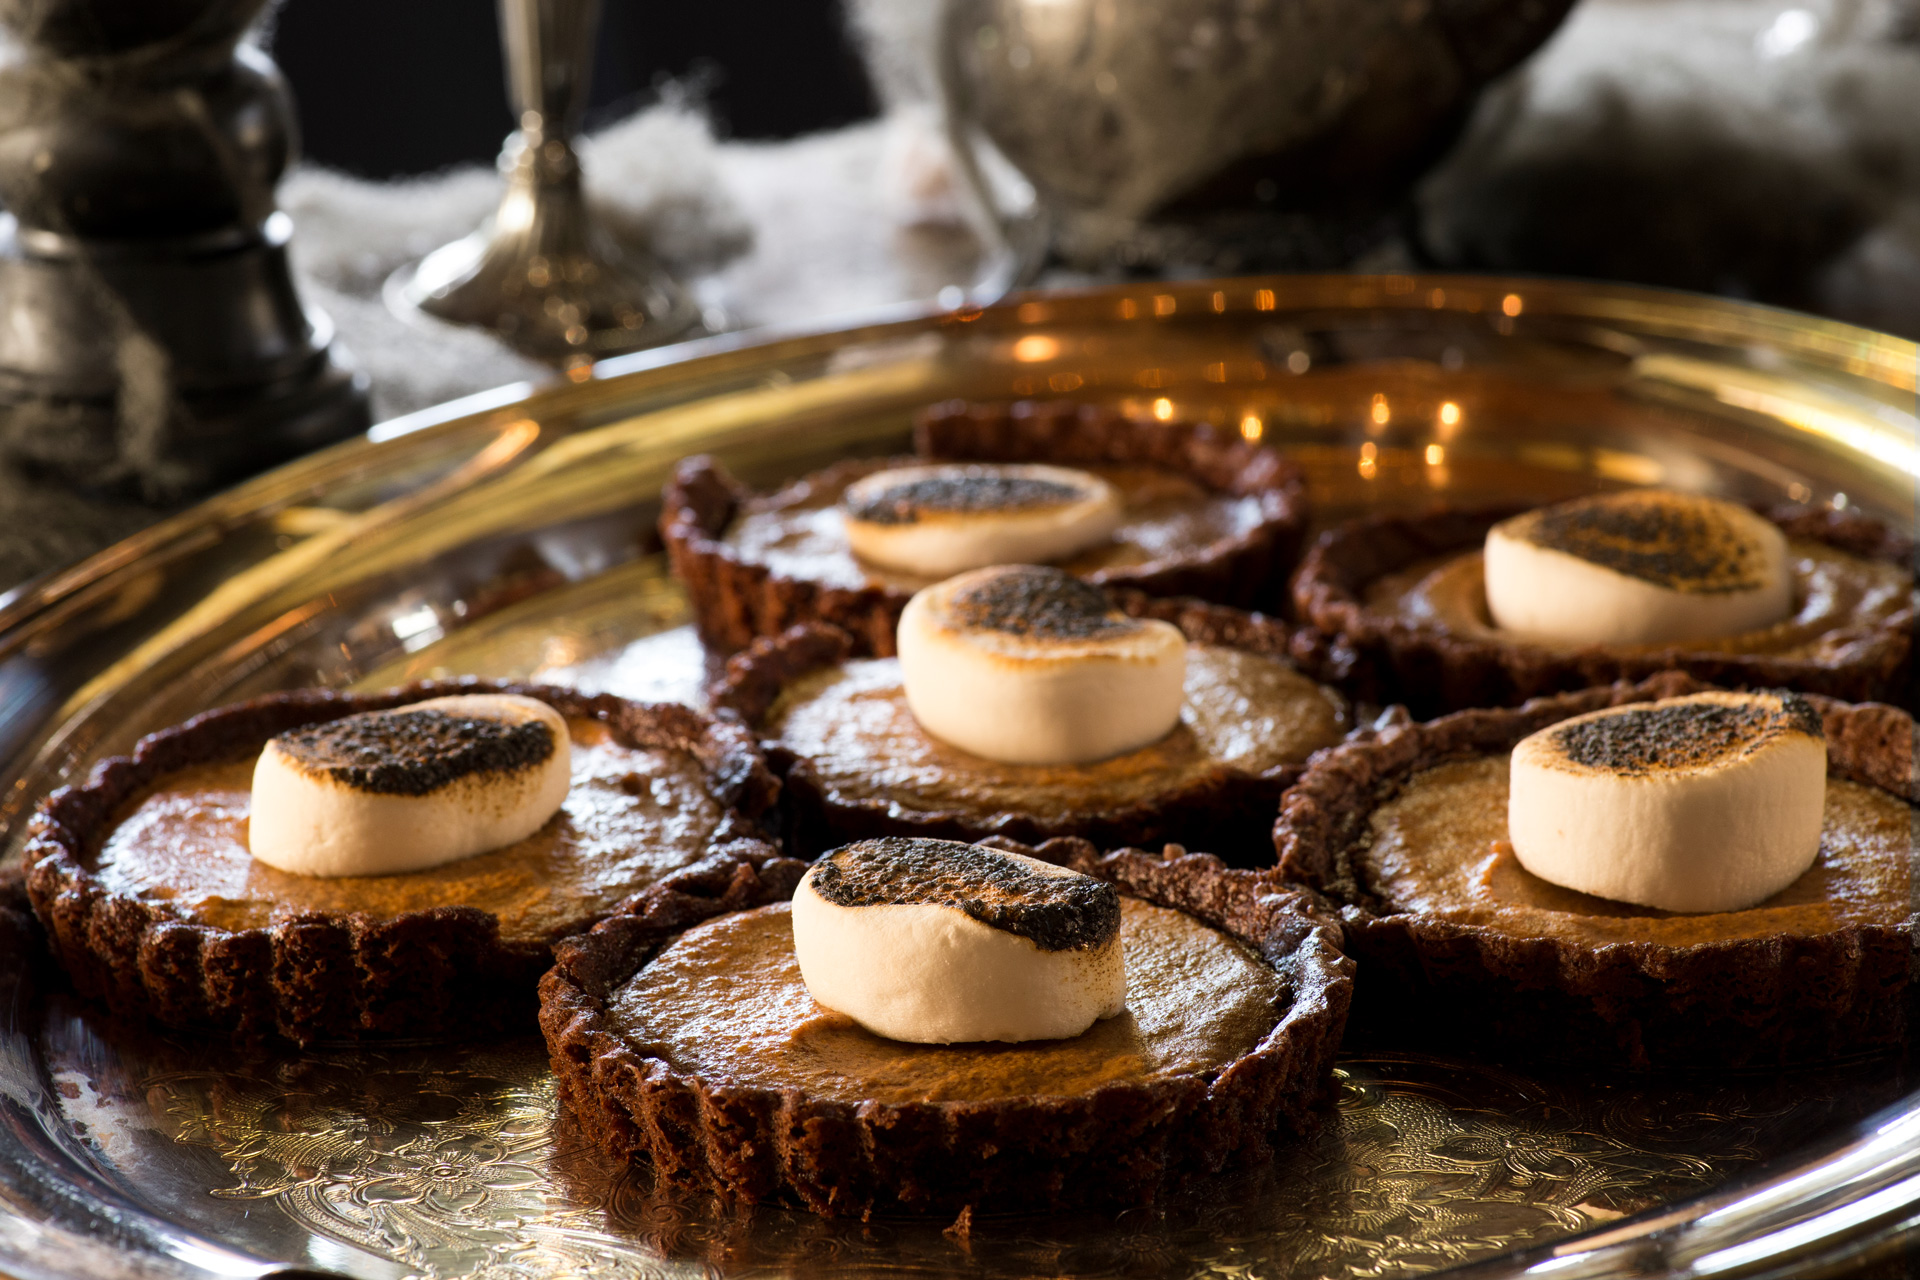 Brownie Pumpkin Pie combines the best of two worlds–and brings out the best of fall. What’s more, it’s half-scratch so you can use a mix, or use your favorite homemade brownie recipe, your choice. These flavors mash up into something deliciously unexpected.